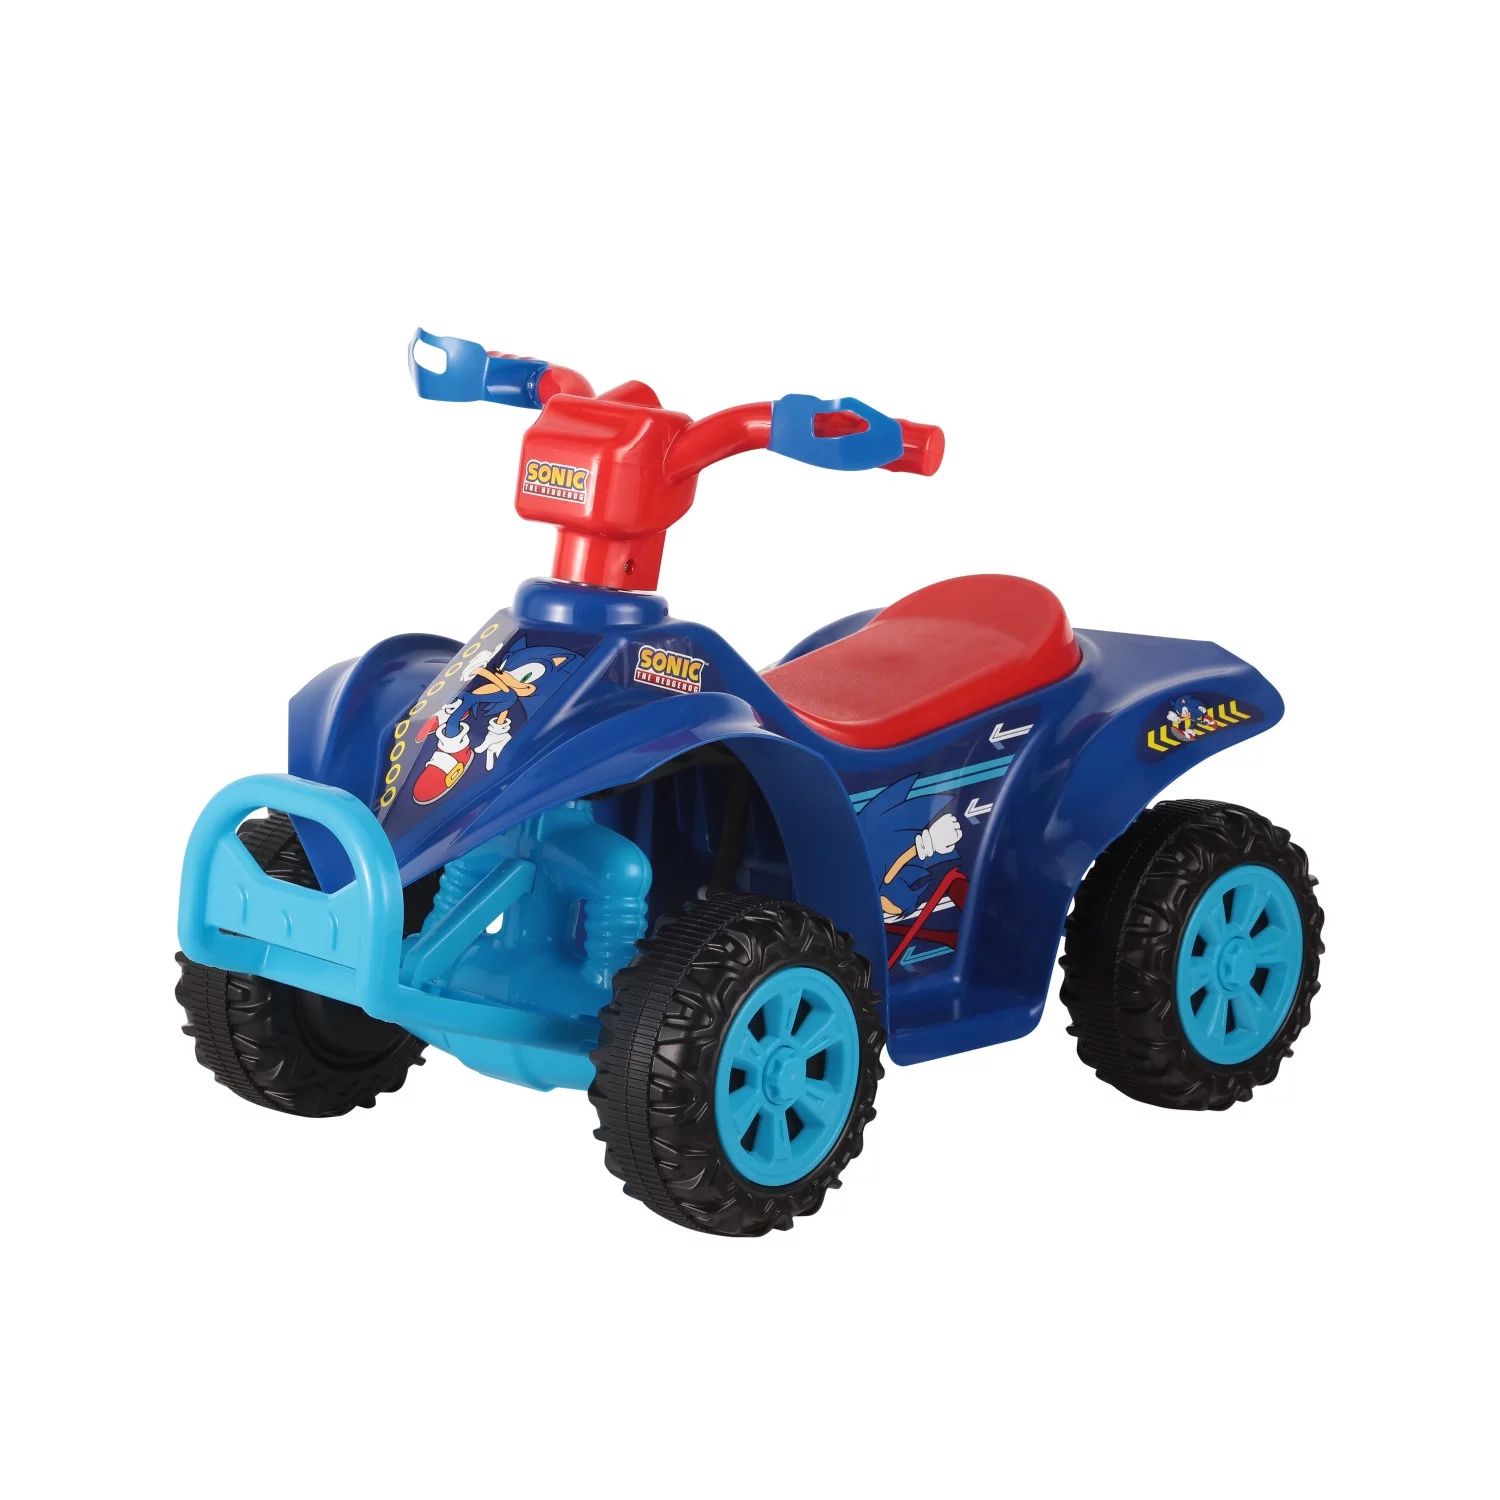 Licensed Sonic the Hedgehog 6V Battery Powered Ride on ATV for Children Ages 2-5 Years Old, Blue | Walmart (US)